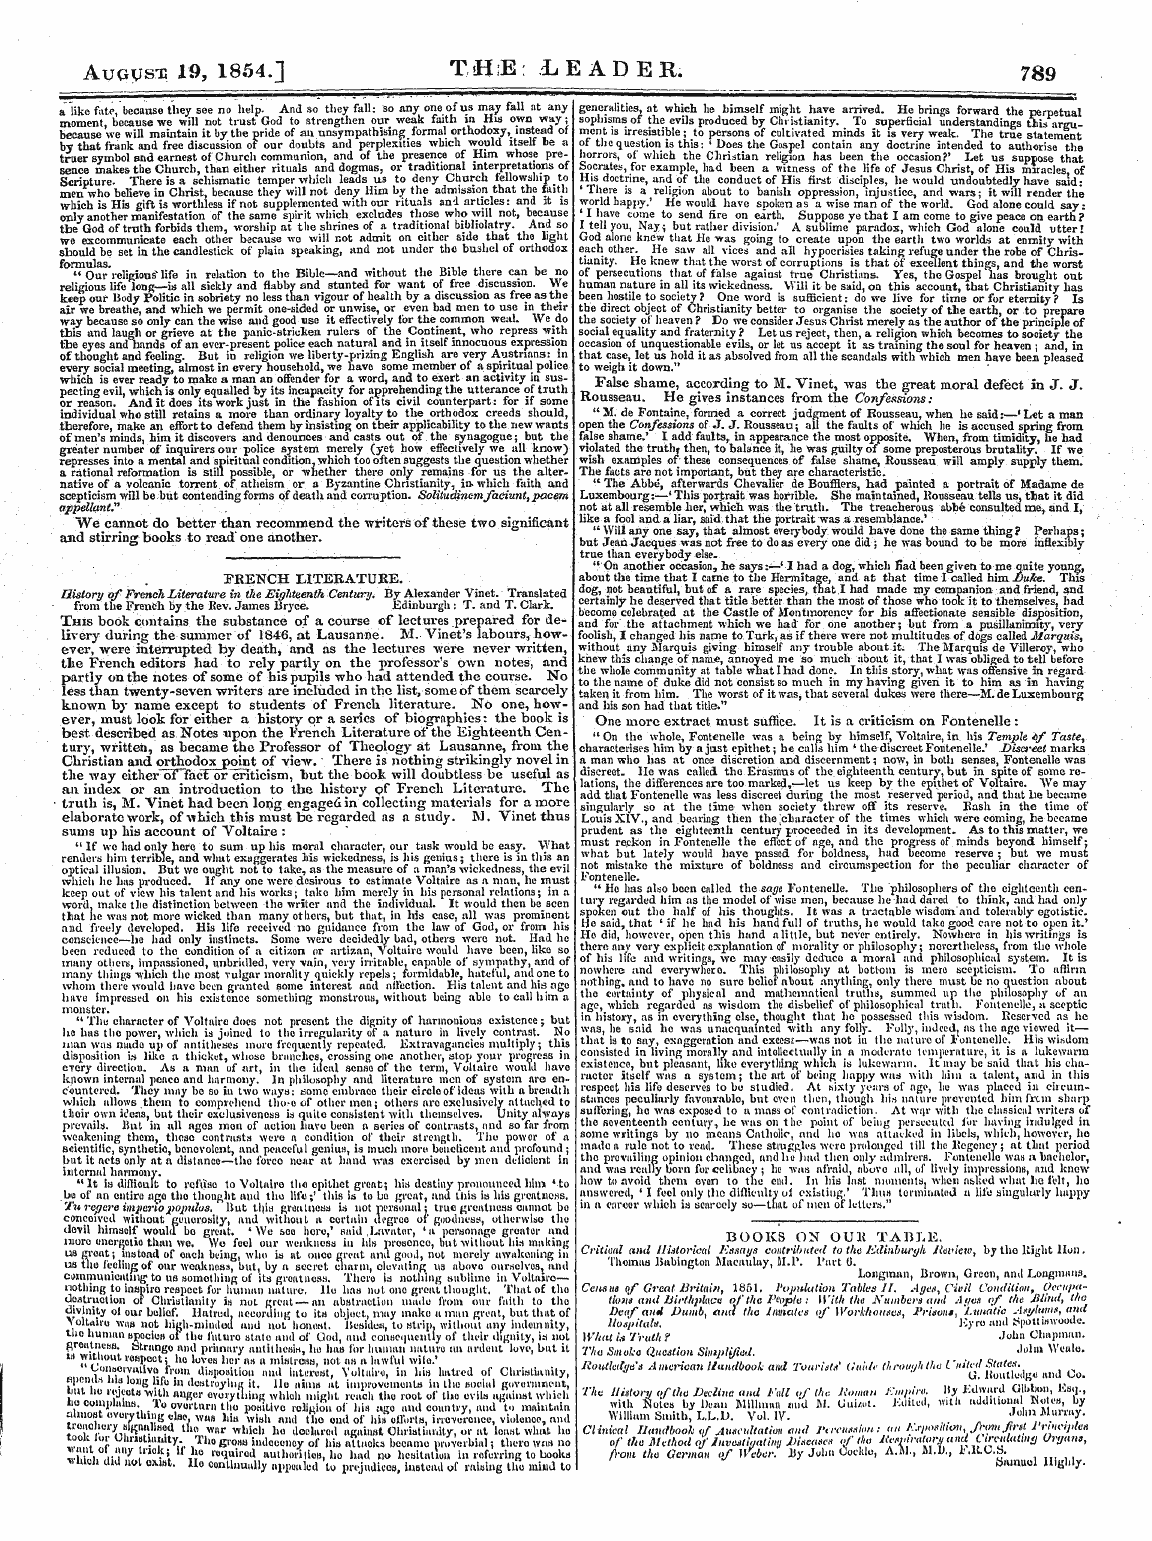 Leader (1850-1860): jS F Y, 2nd edition: 21